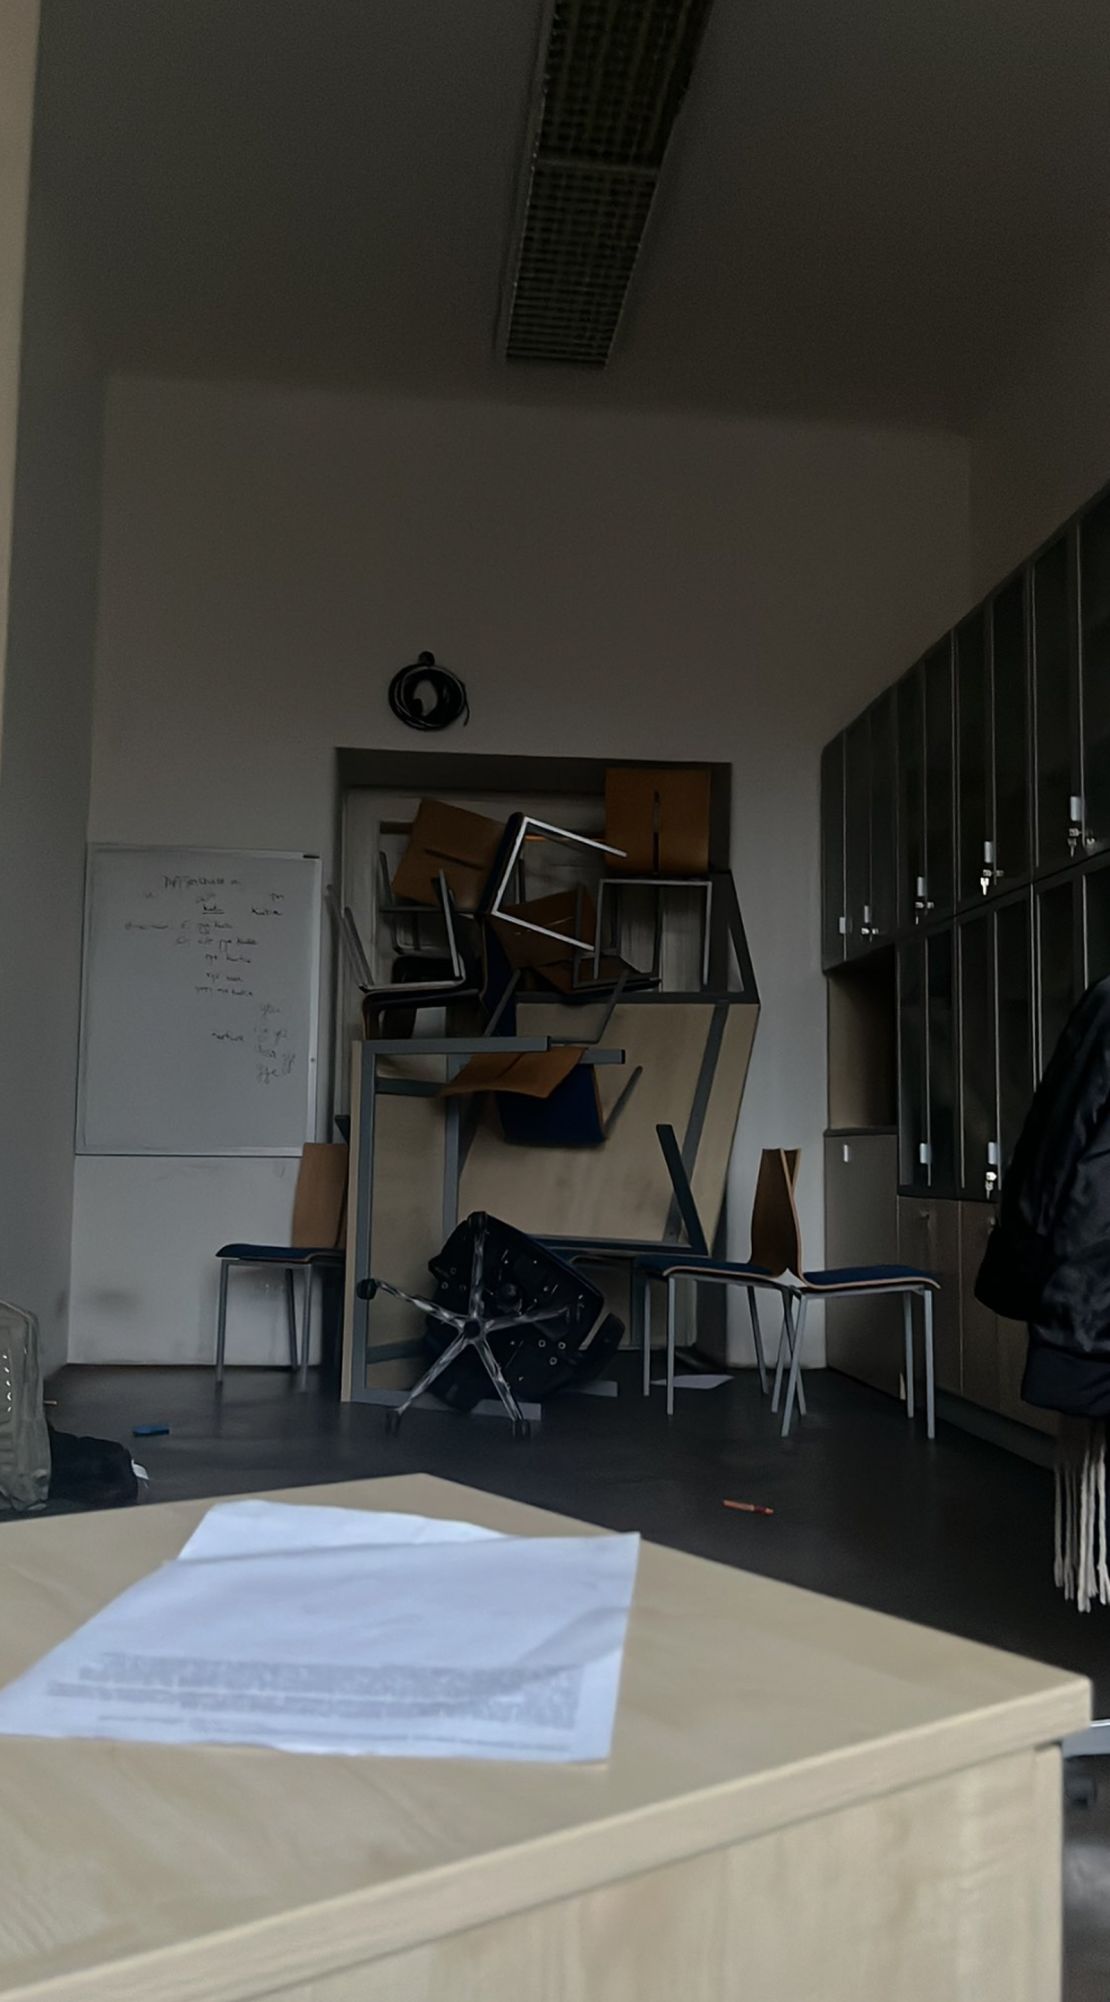 Student barricades door as shooter goes on rampage, killing at least 15 in Prague university.